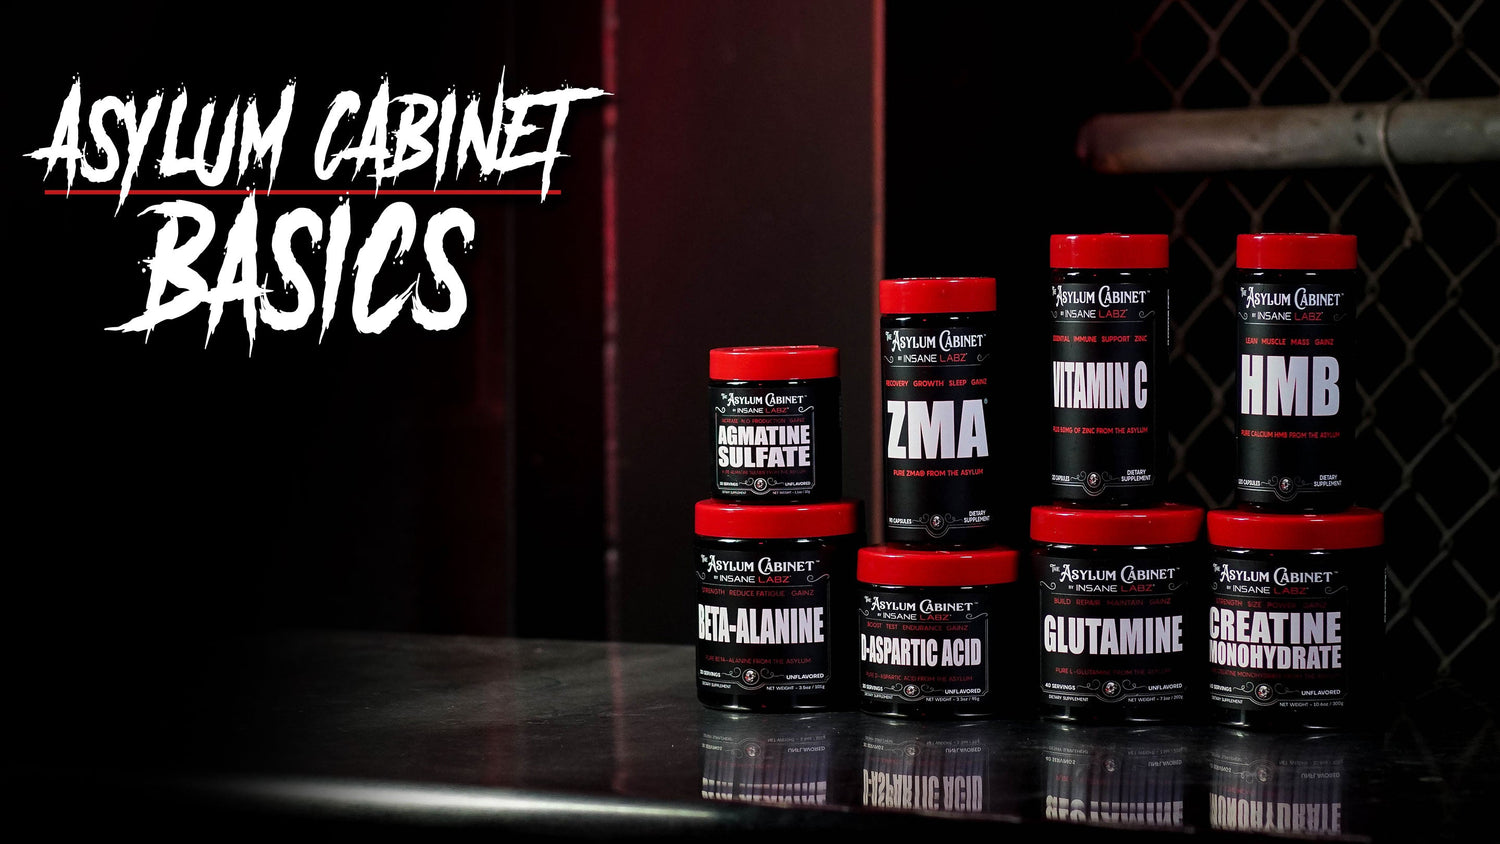 Best Price Nutrition - 🤡 Buy Any Insane Labz Product Get a Free